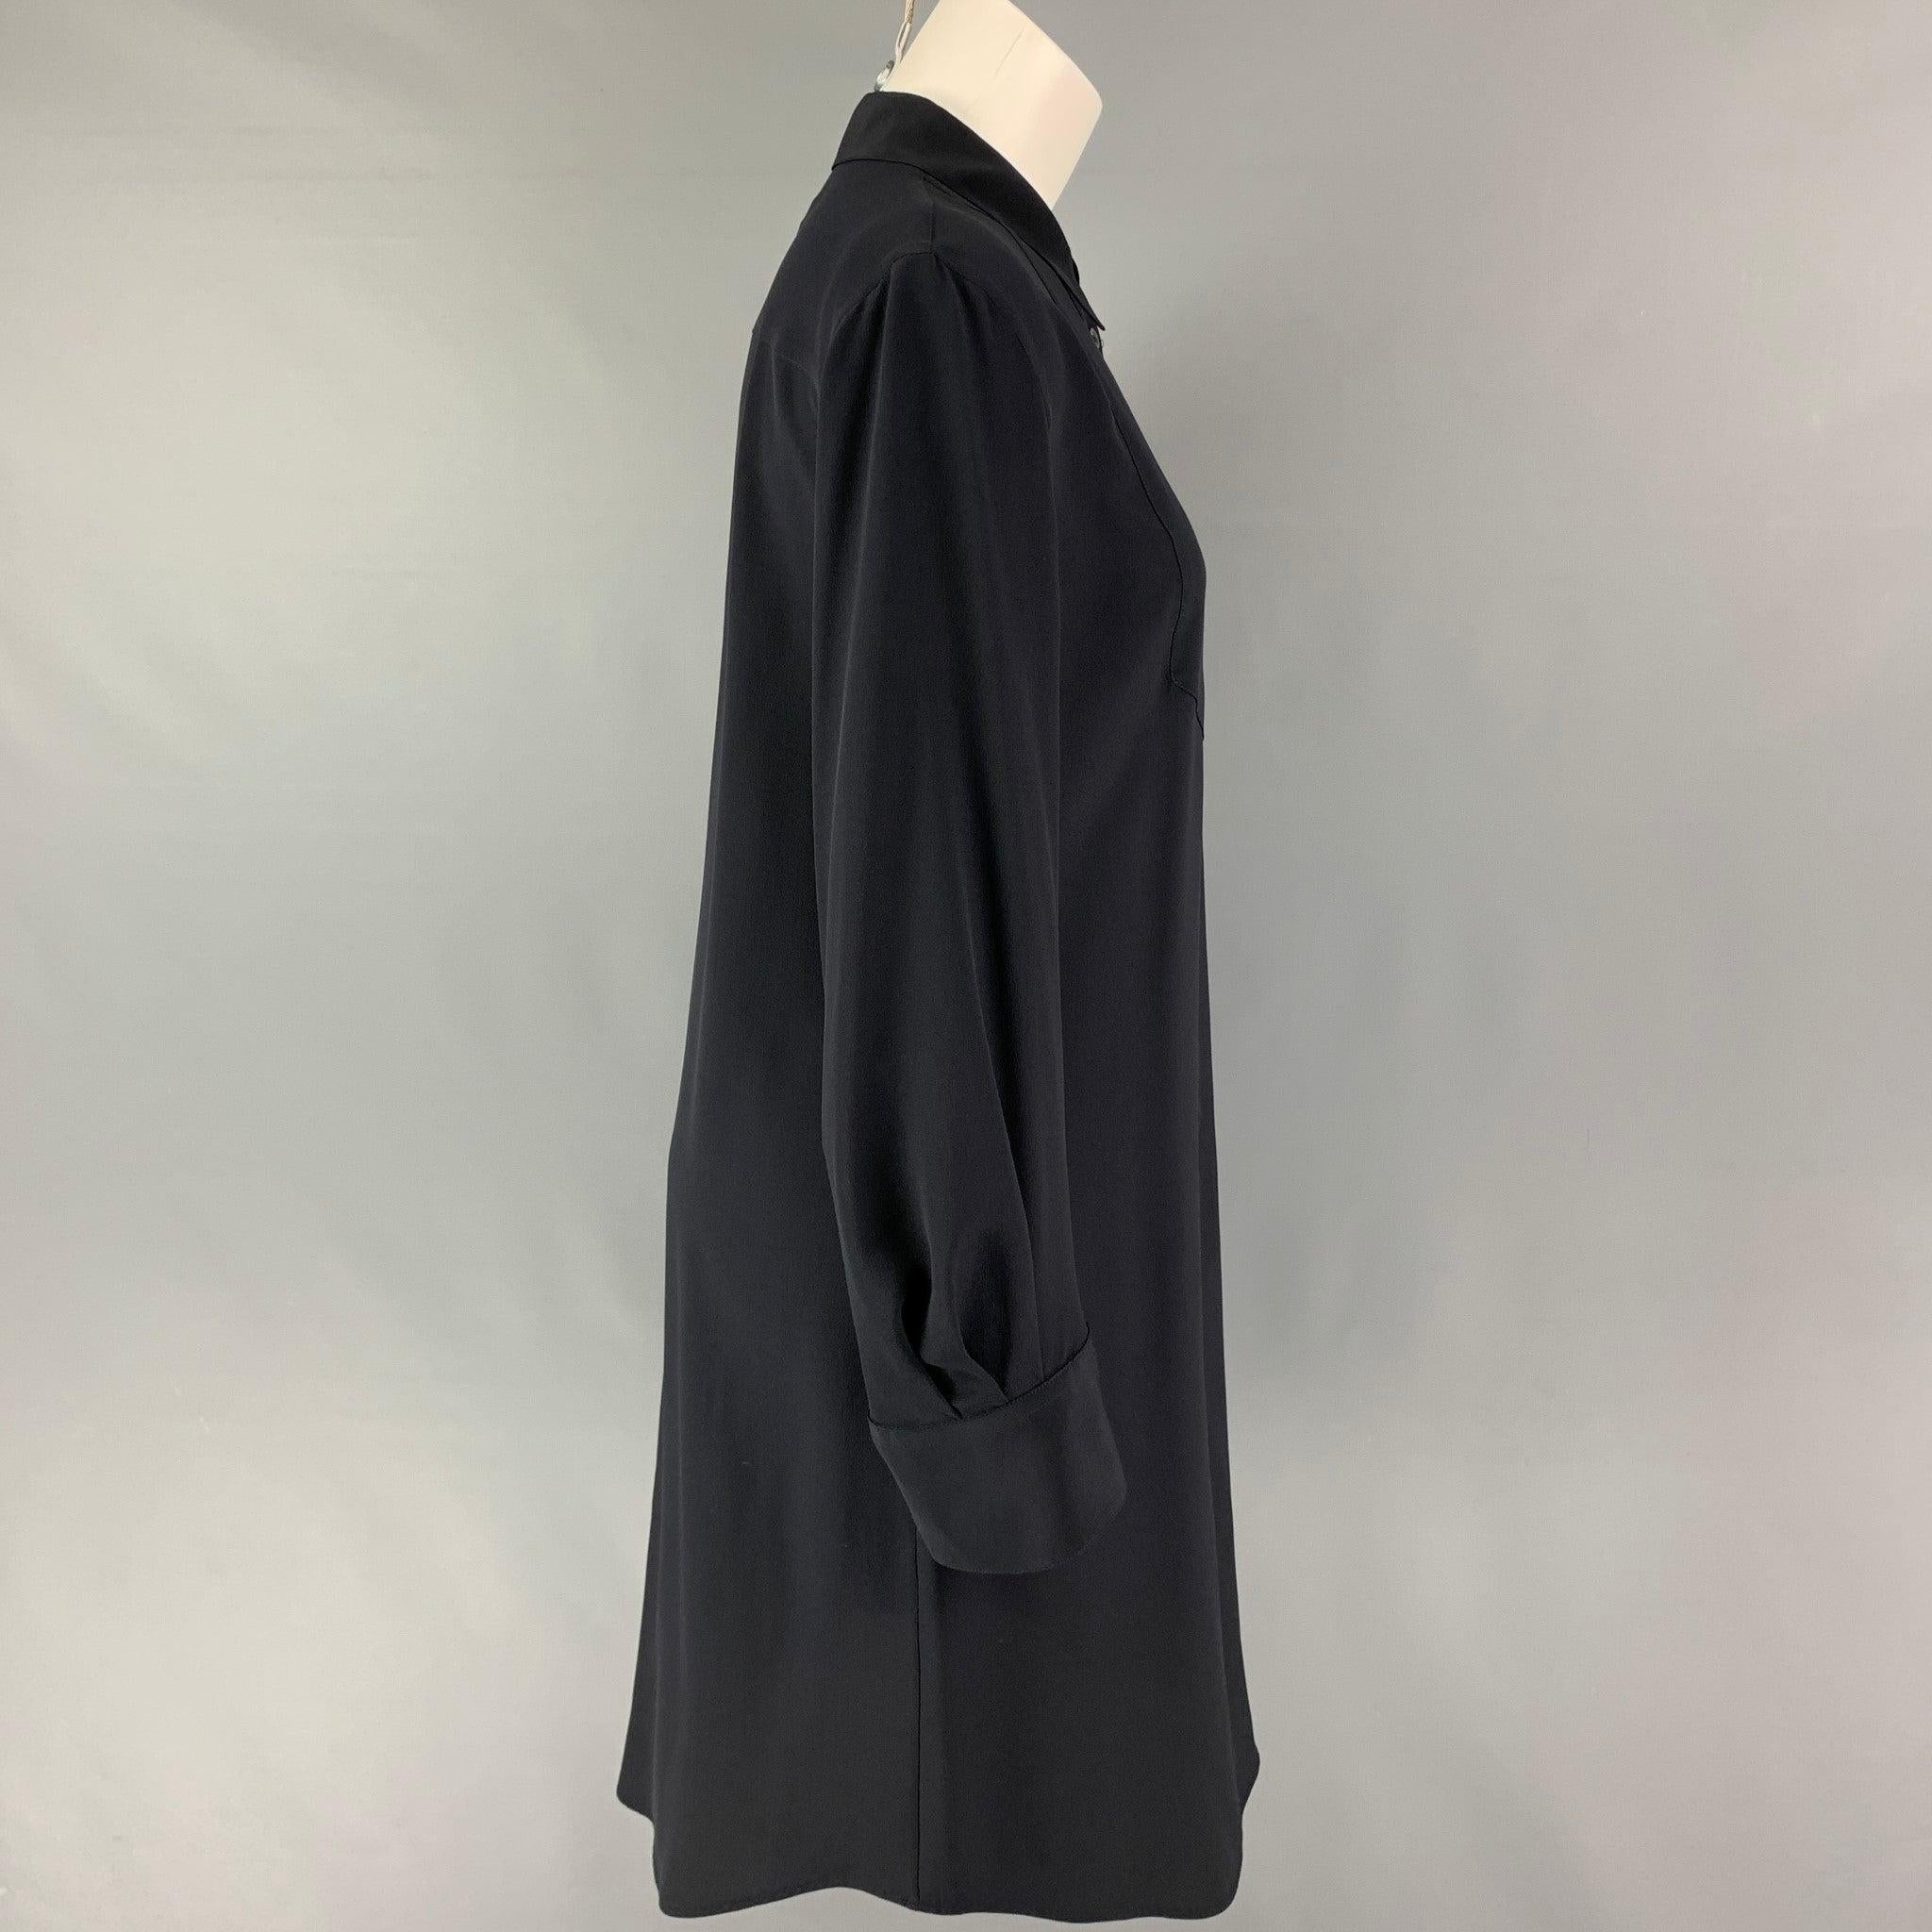 VIKTOR & ROLF shirt dress comes in a black silk featuring a pointed collar and a buttoned closure.
Very Good
Pre-Owned Condition. 

Marked:   46 

Measurements: 
 
Shoulder: 17 inches  Bust: 39 inches  Hip: 38 inches  Sleeve: 24.5 inches  Length: